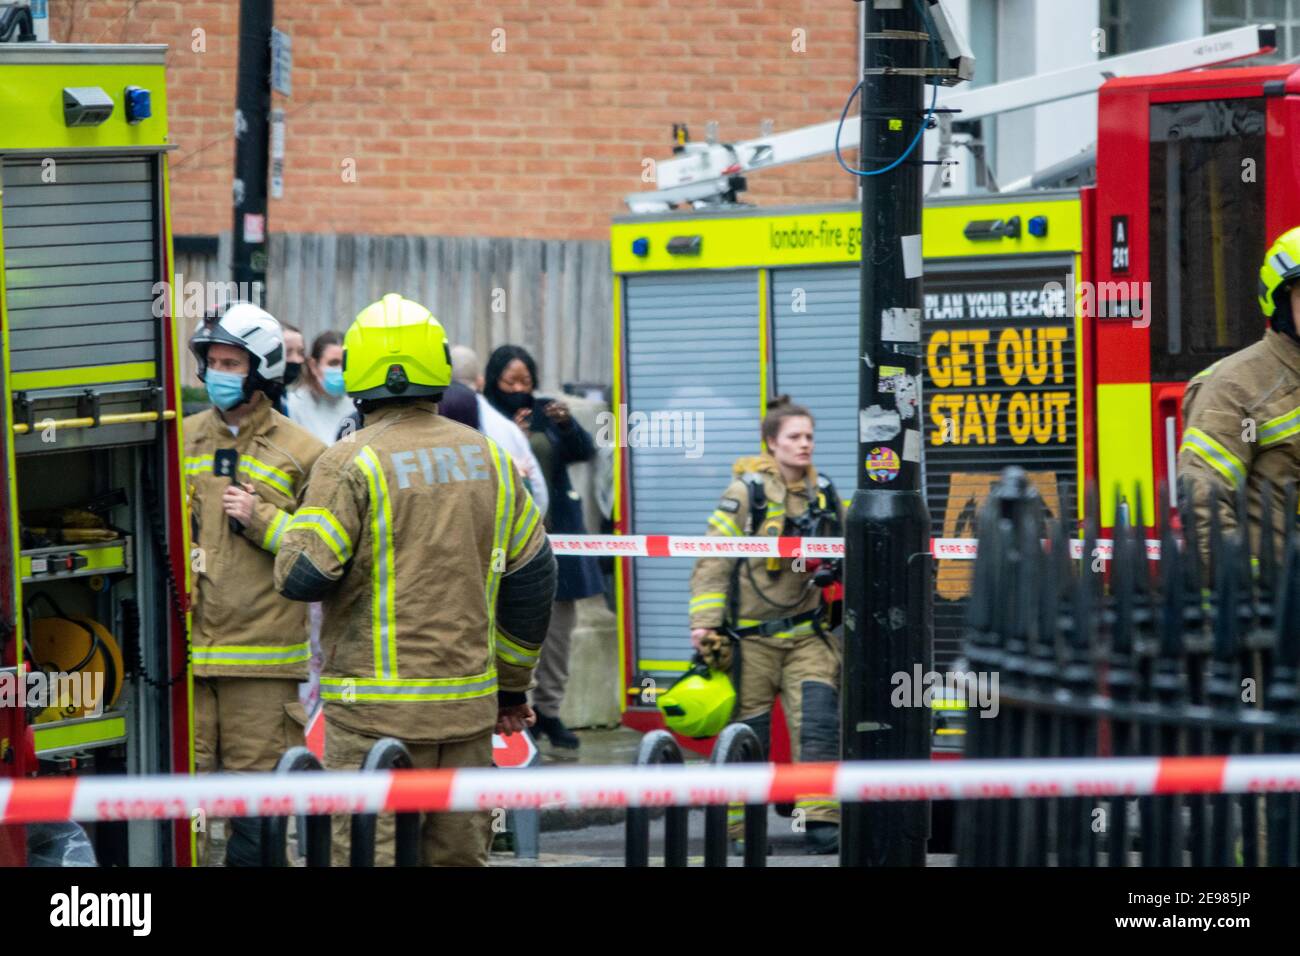 London, U.K. 3rd February 2021. London Fire Brigade called to fourth floor flat fire in Endsleigh Gardens, Bloomsbury. Five fire engines and 35 firefighters attended with residents of the building being evacuated and some treated for shock with metallic thermal blankets by London Ambulance Service. Credit: Bradley Taylor / Alamy Live News Stock Photo